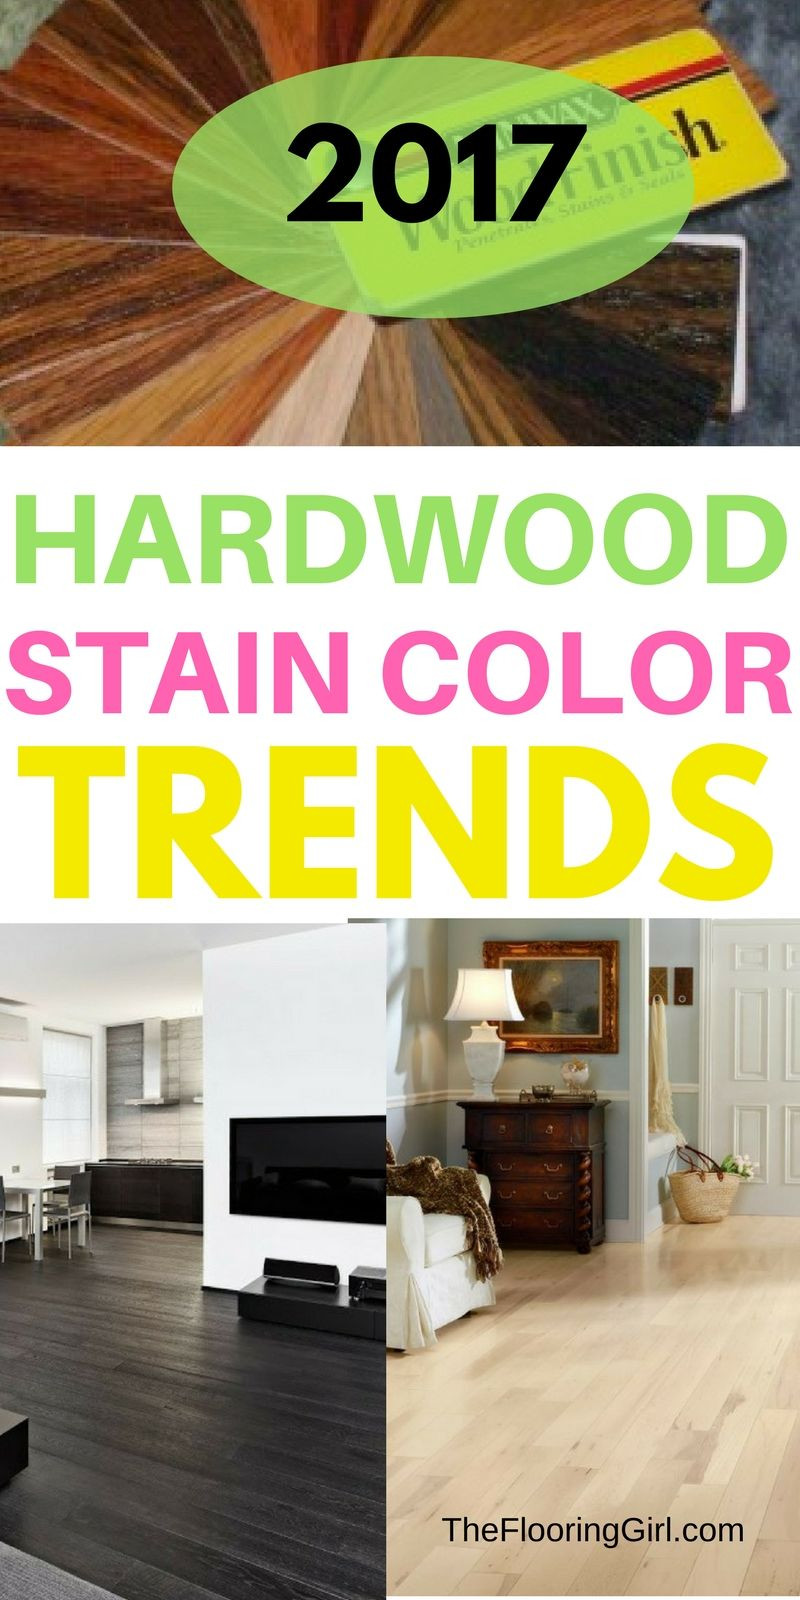 10 Nice Cost to Finish Hardwood Floors 2024 free download cost to finish hardwood floors of hardwood flooring stain color trends 2018 more from the flooring regarding hardwood flooring stain color trends for 2017 hardwood colors that are in style t